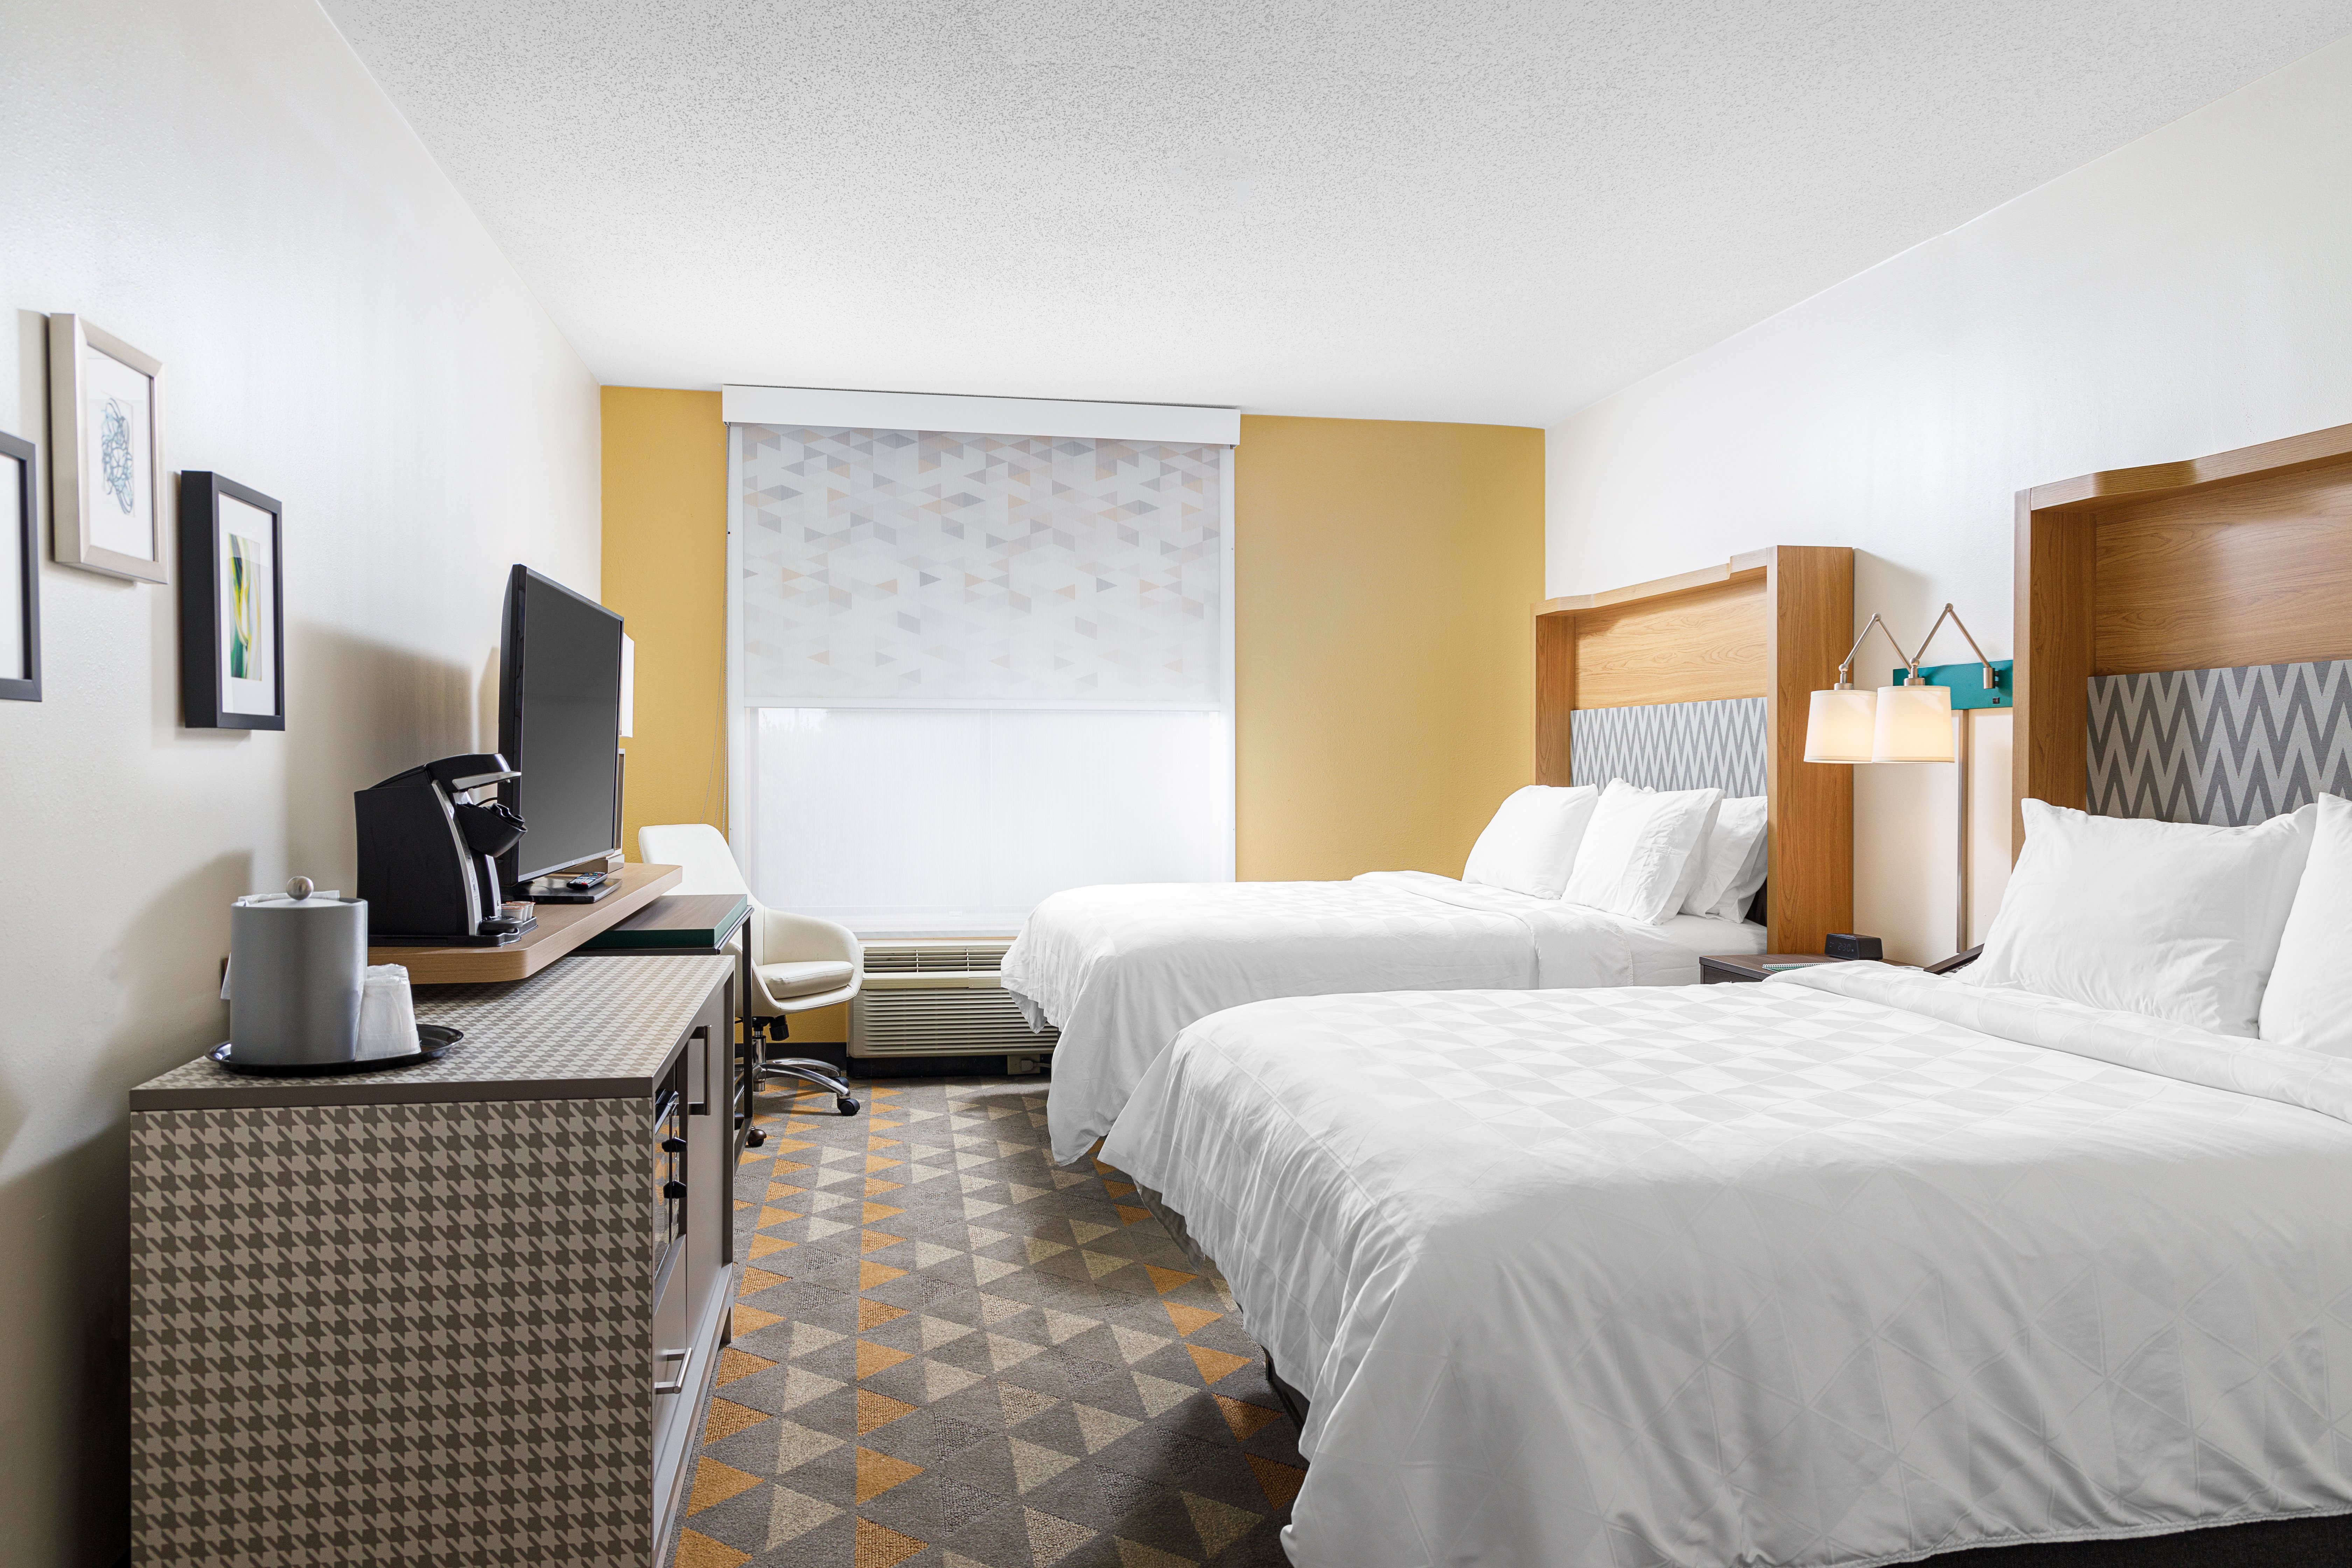 Relax and refresh in our spacious Queen/Queen guestroom.